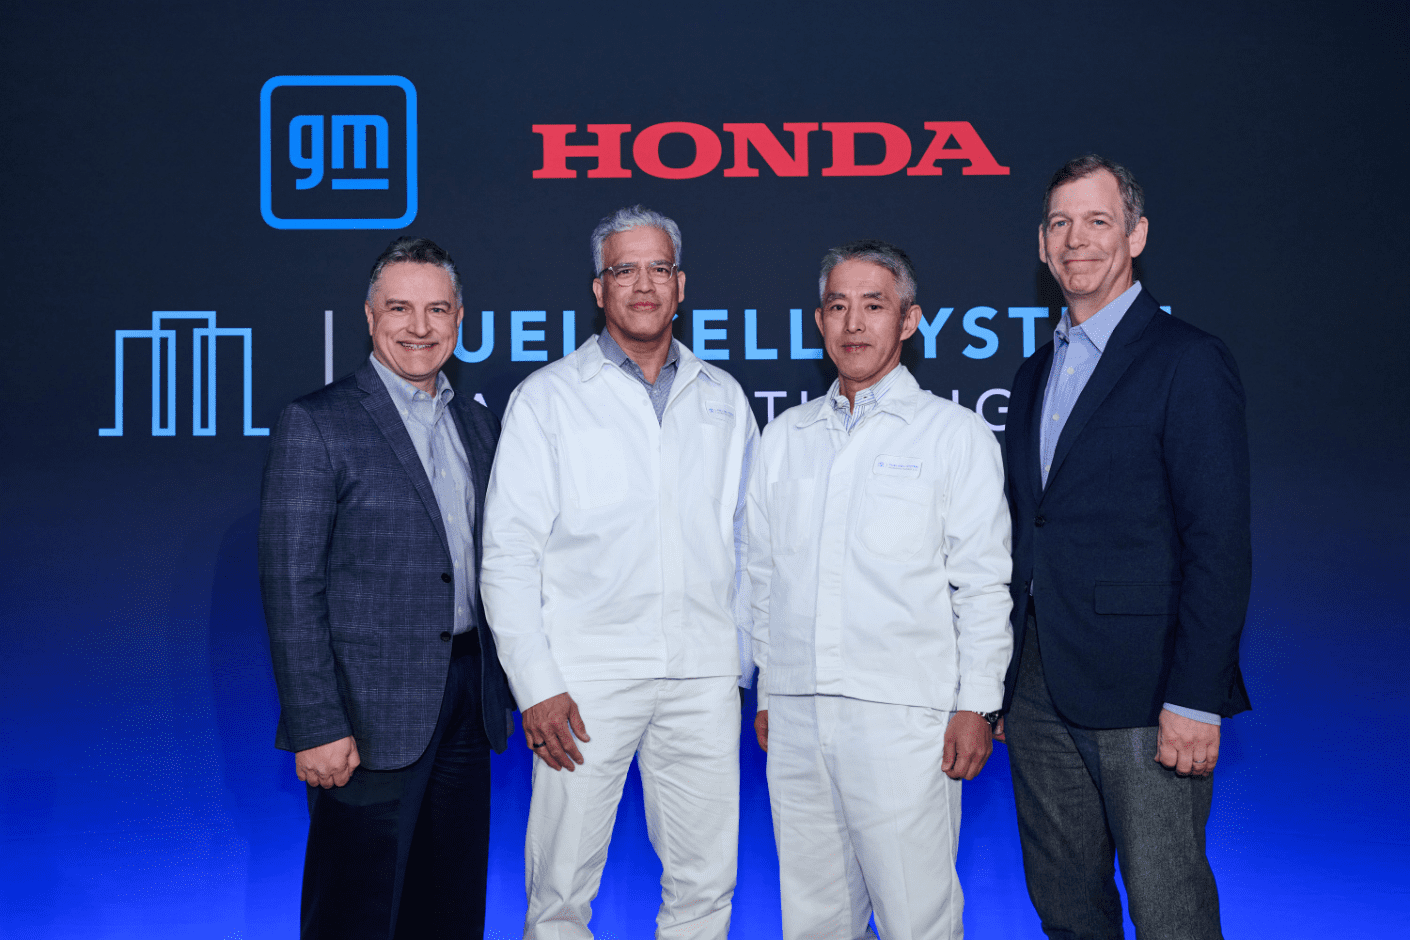 Honda and General Motors' joint venture, FCSM, had begun producing hydrogen fuel cells for commercial use at GM's Brownstown, Michigan plant.